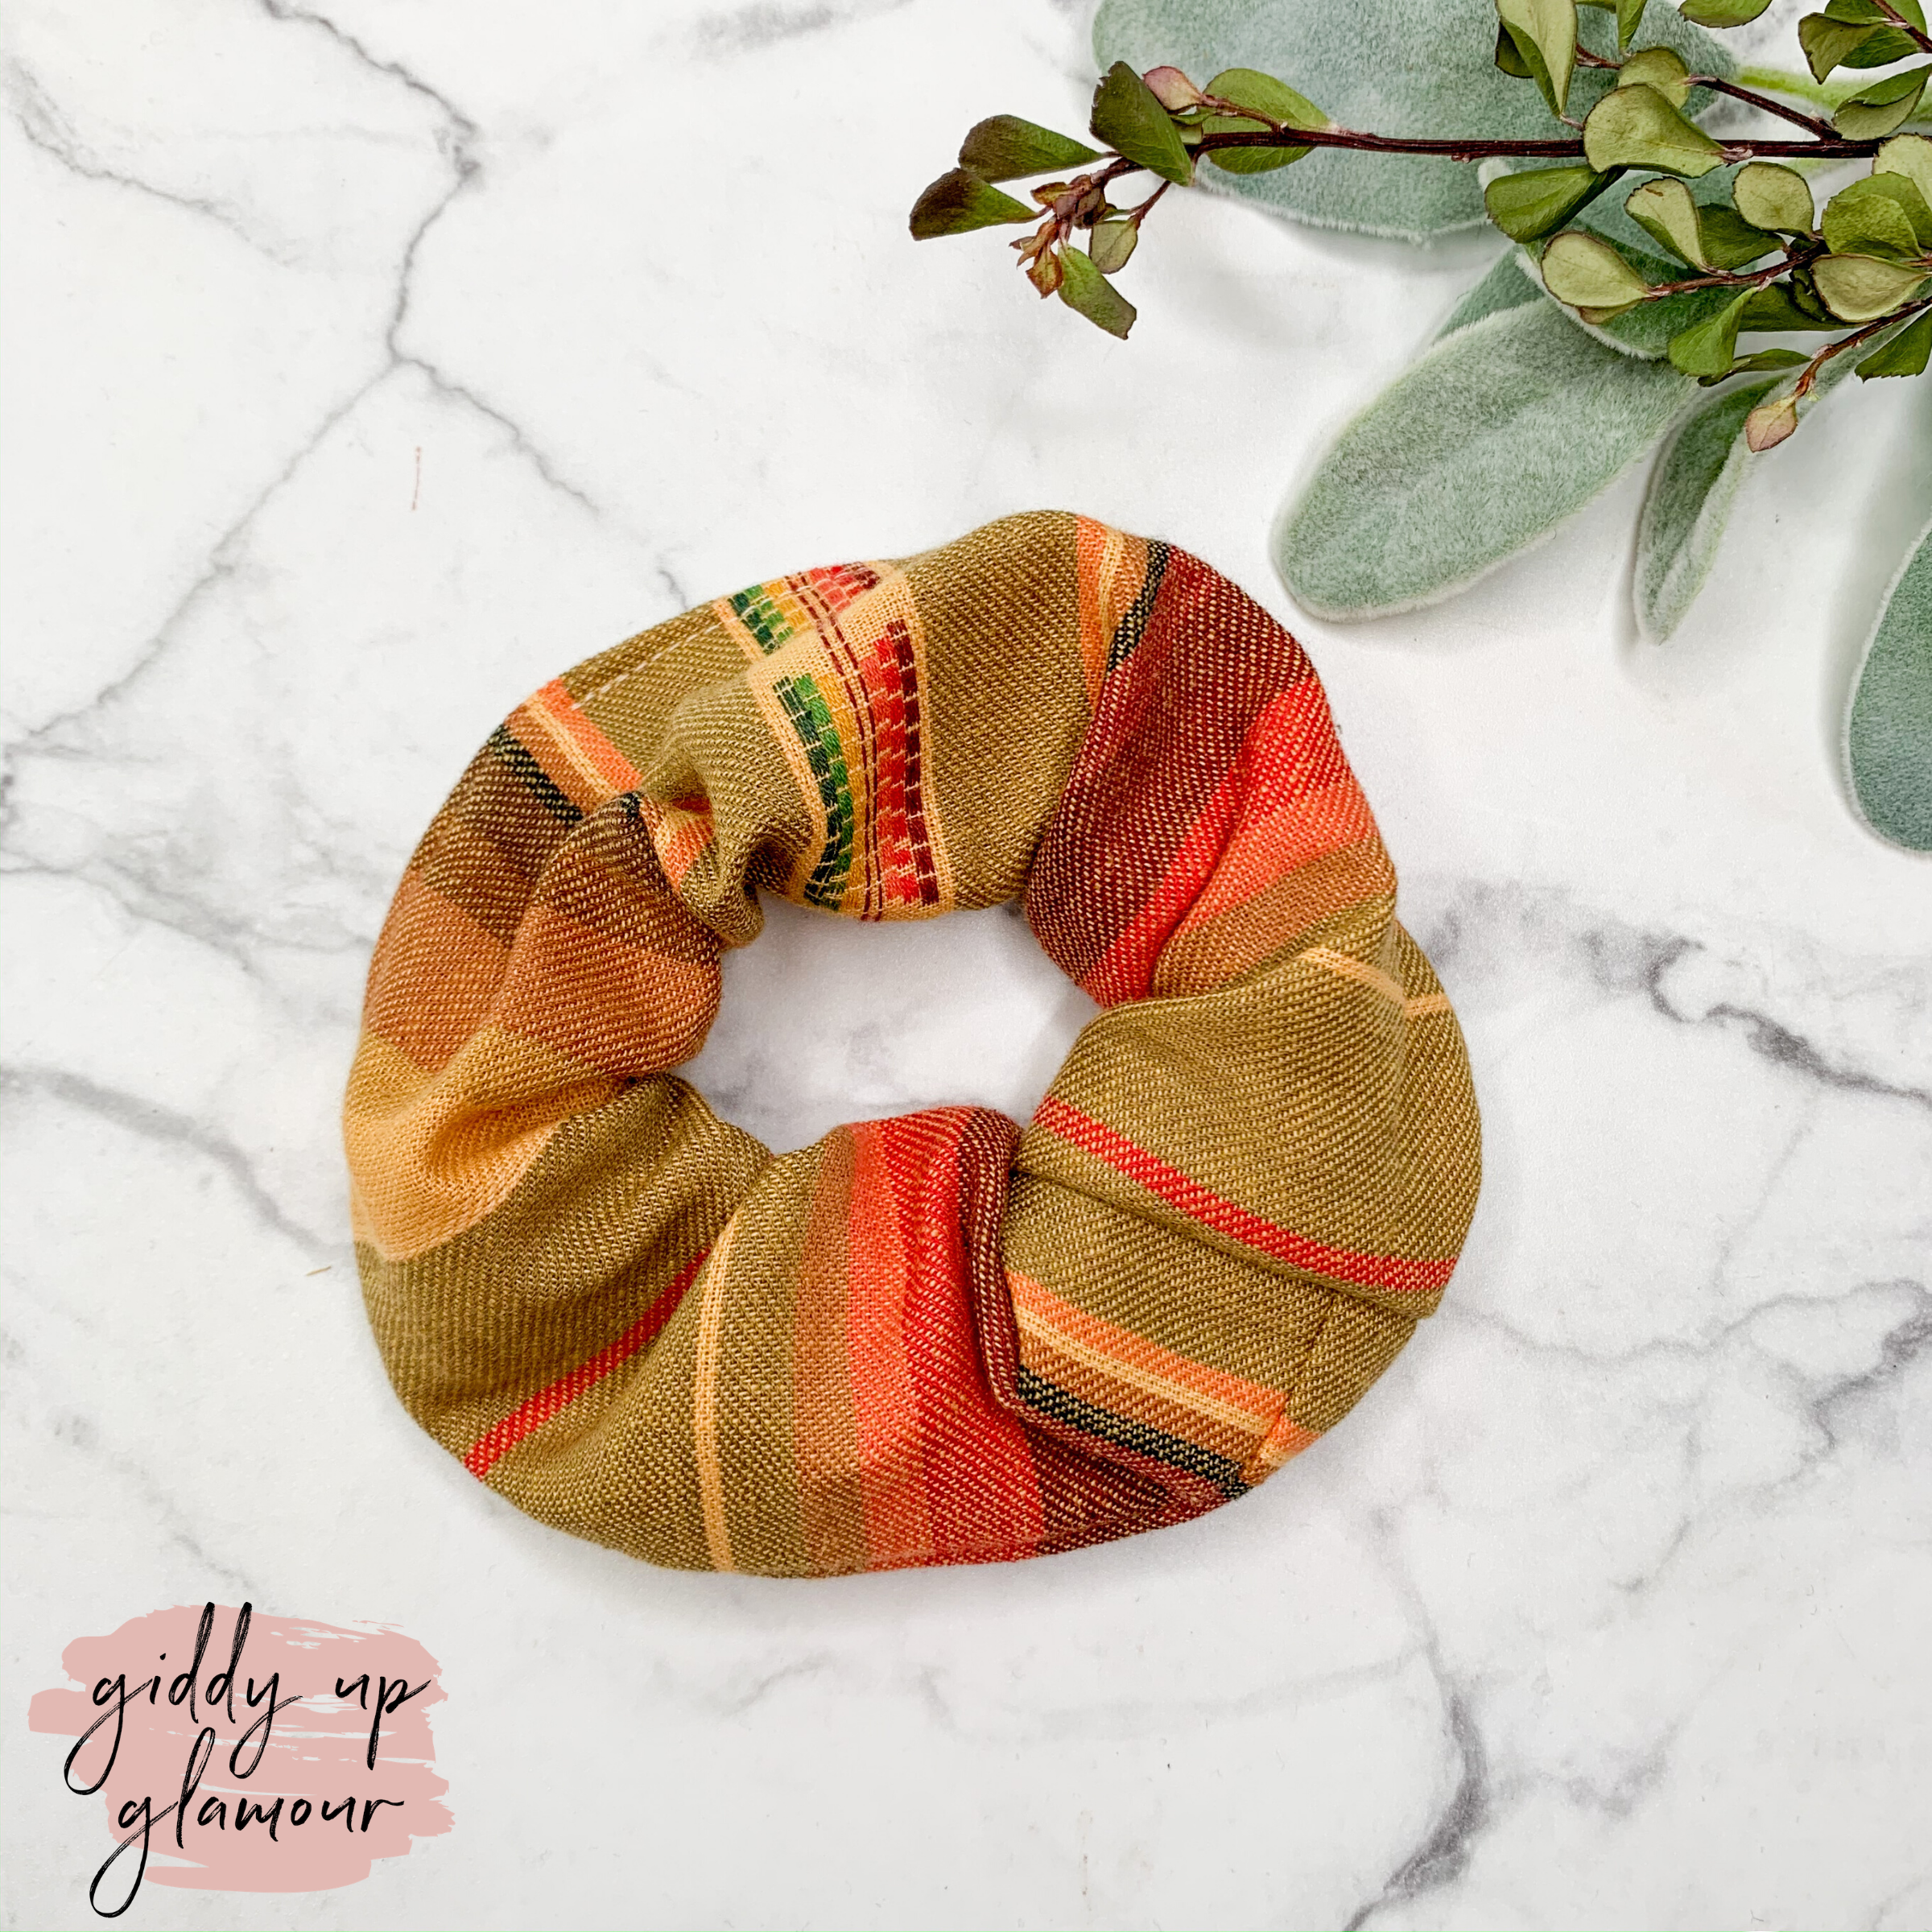 Handmade in Texas | Mojave Serape Scrunchie in Mustard - Giddy Up Glamour Boutique